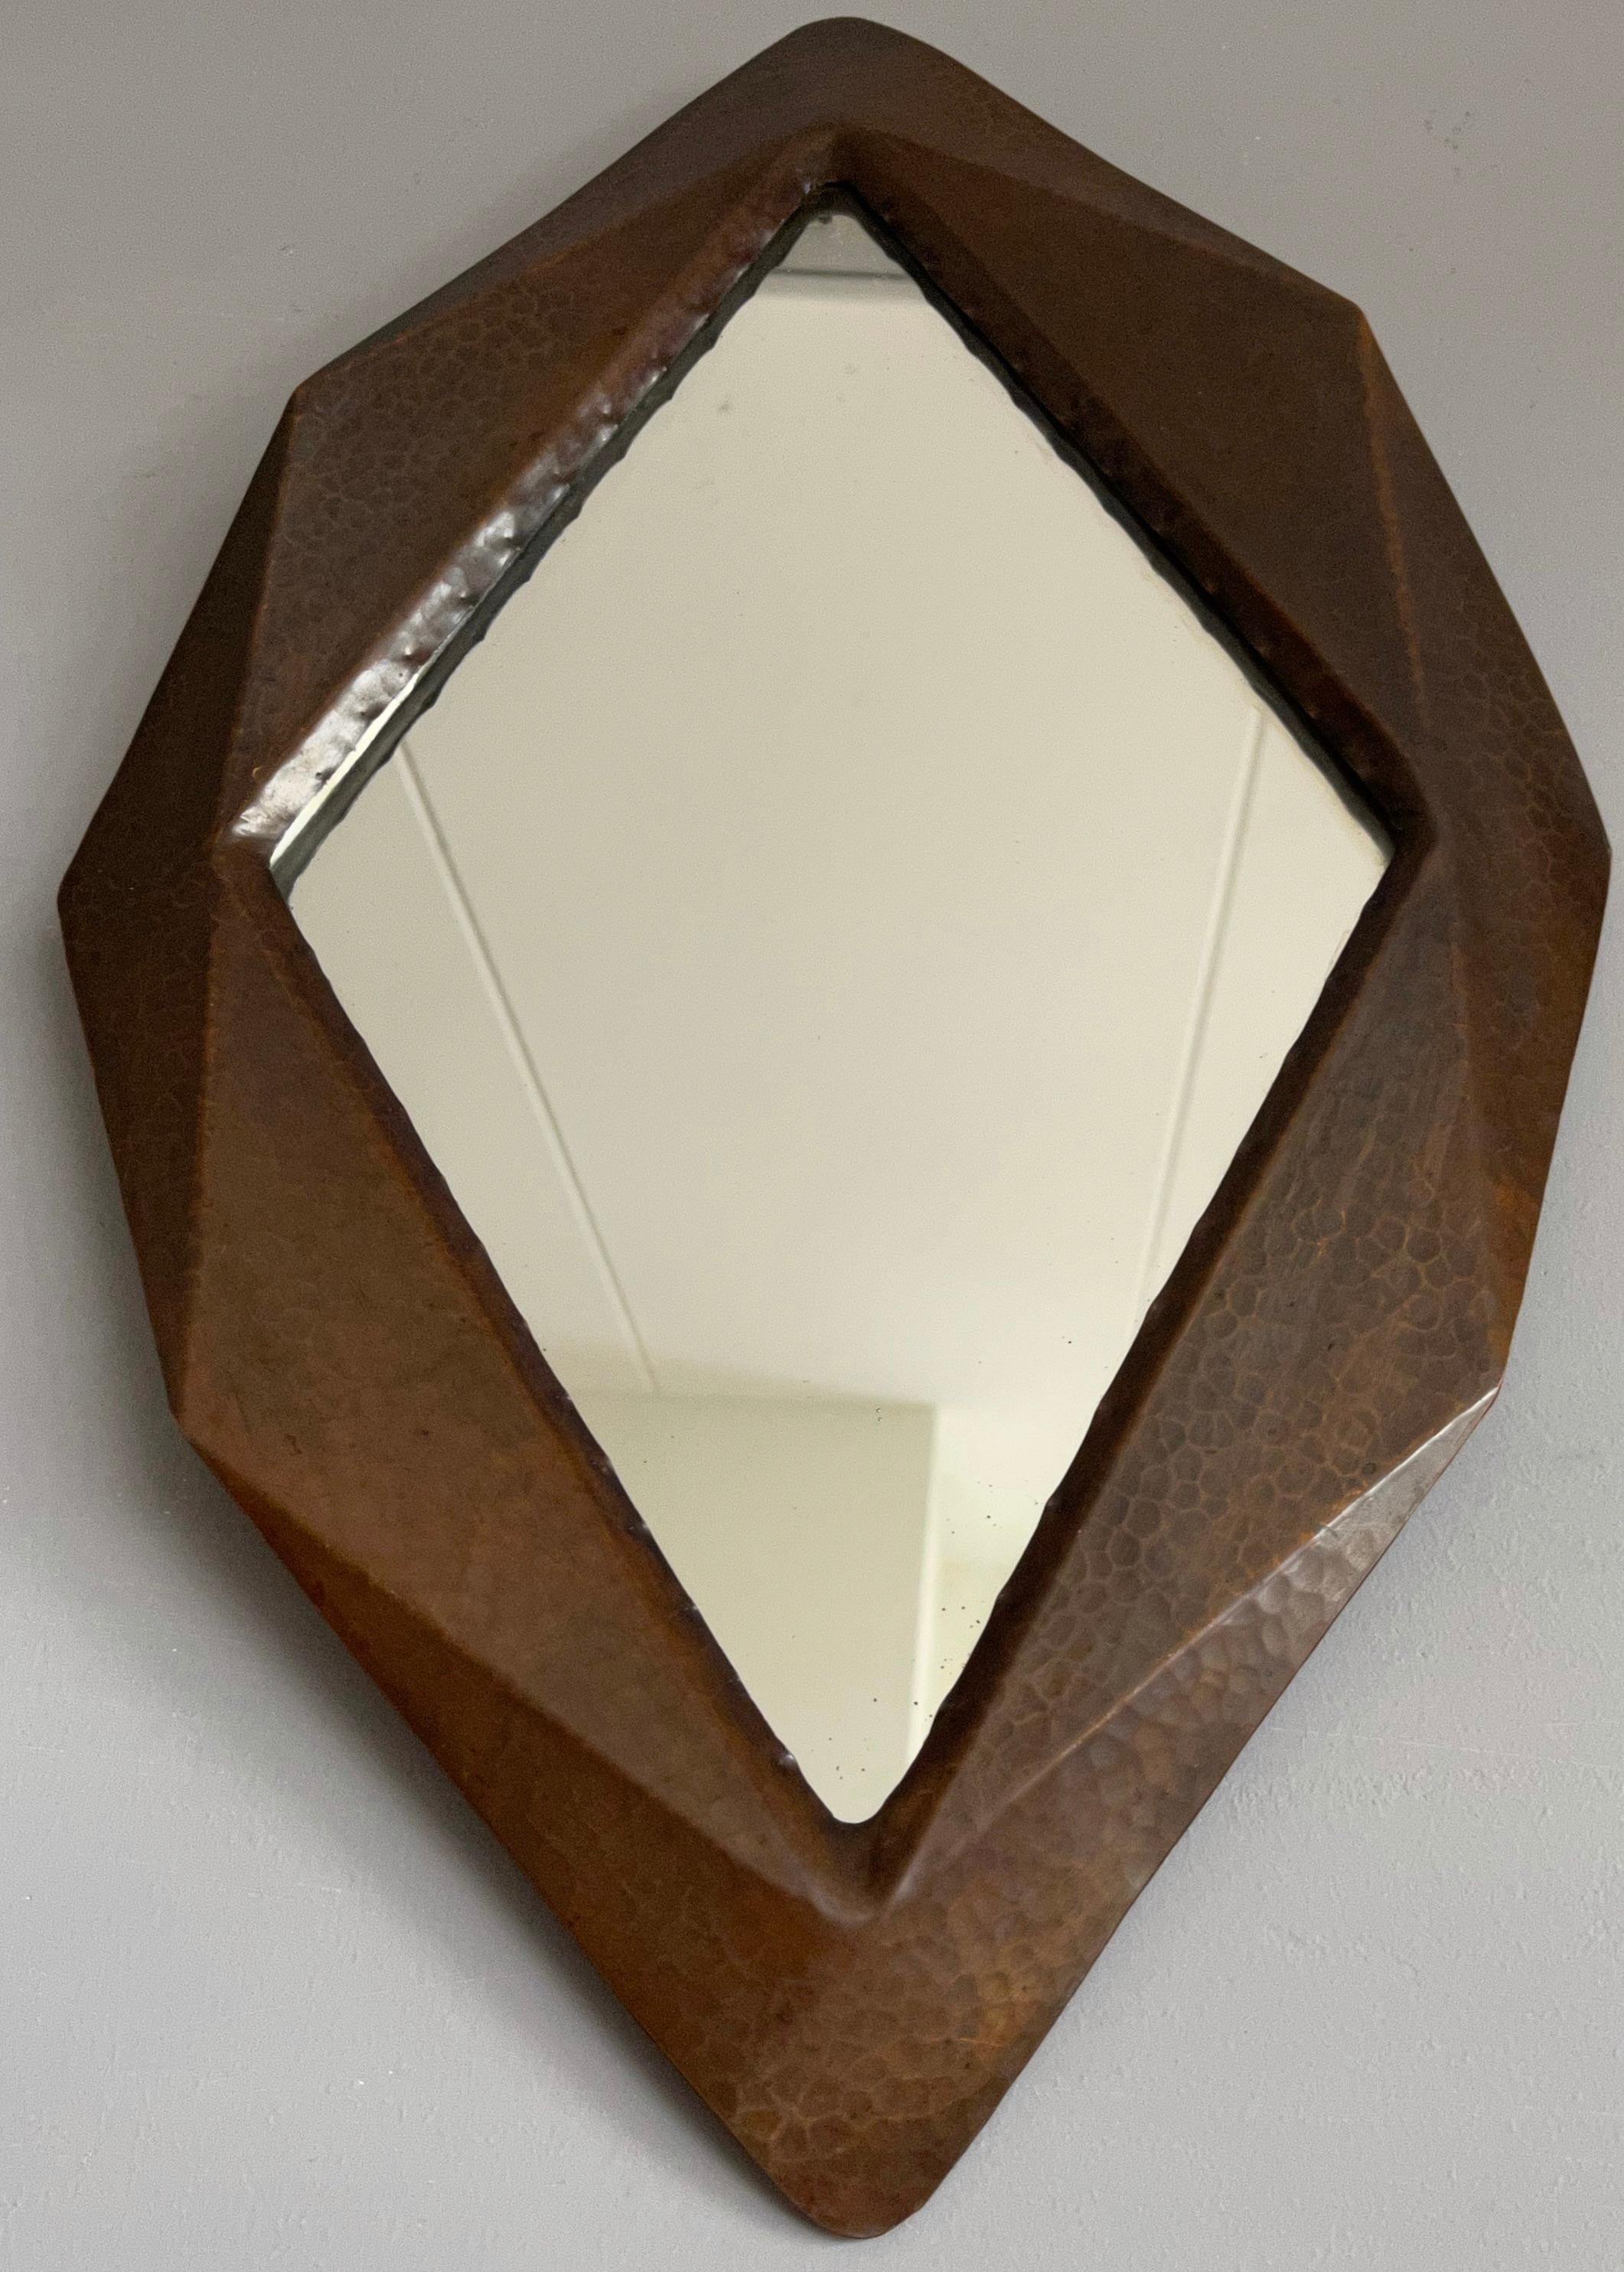 Unique Arts & Crafts Geometric, Cubist Shape, Crafted Copper Hallway Wall Mirror For Sale 6